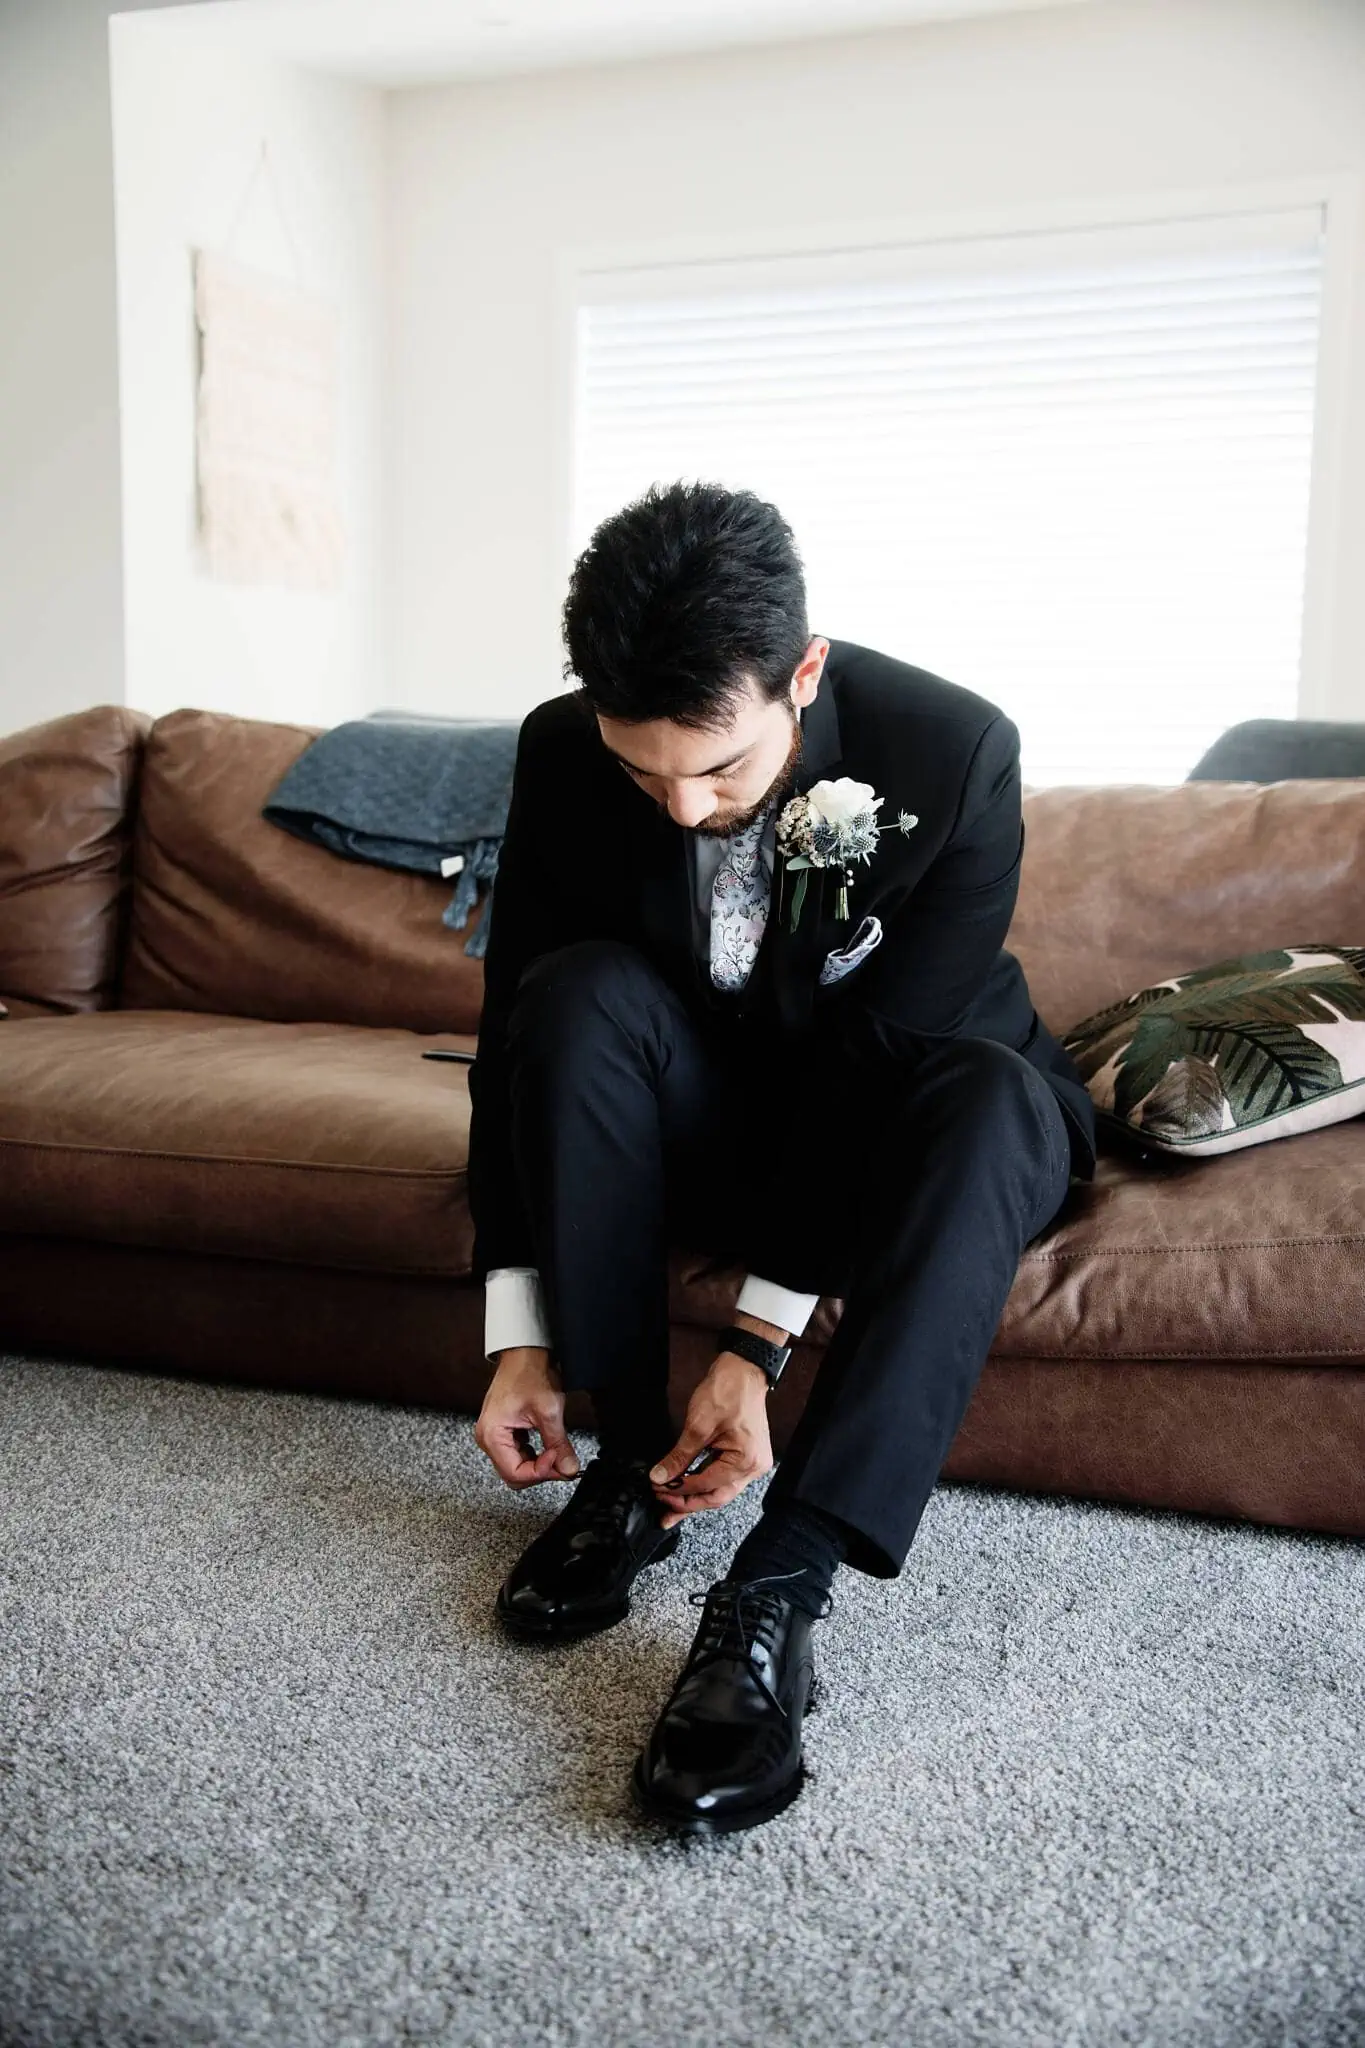 Carlos tying his shoes before his intimate Cecil Peak Heli Elopement Wedding.